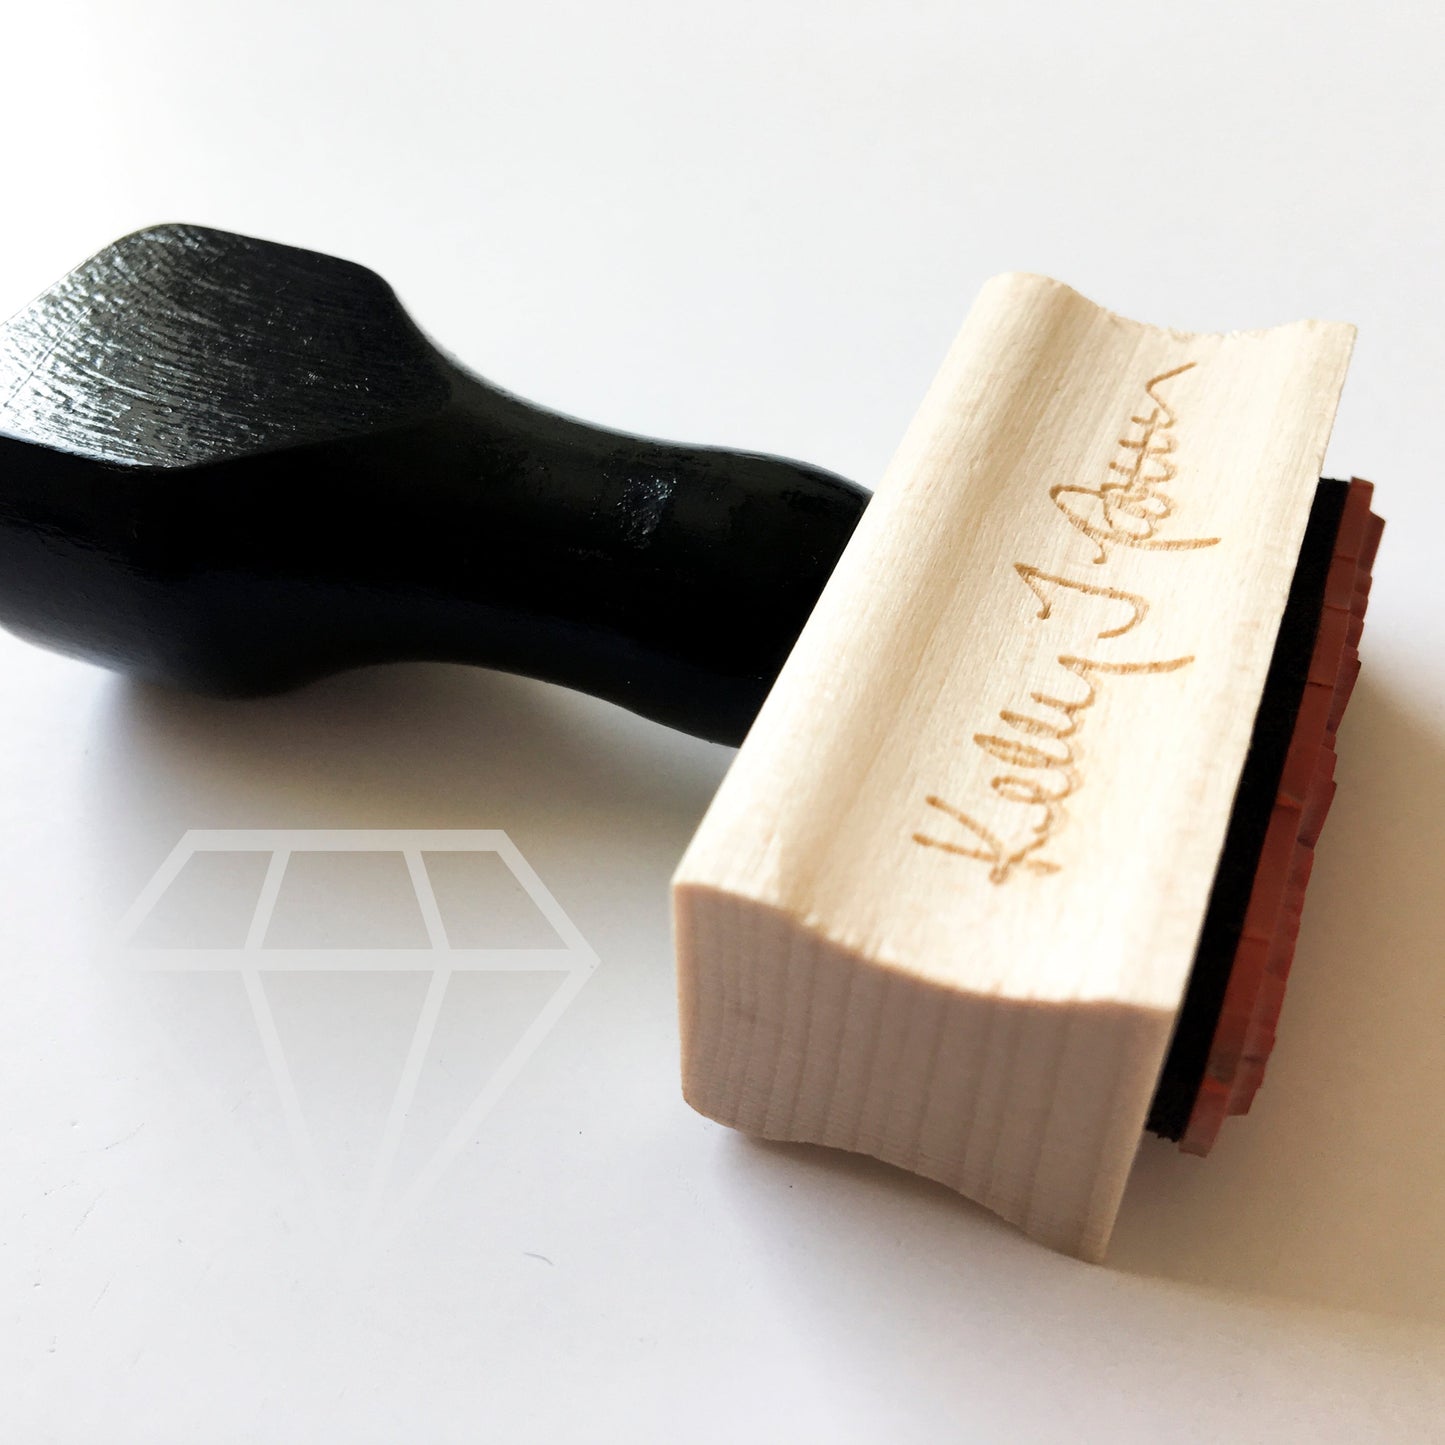 Signature Stamp, Wooden or Self-Inking